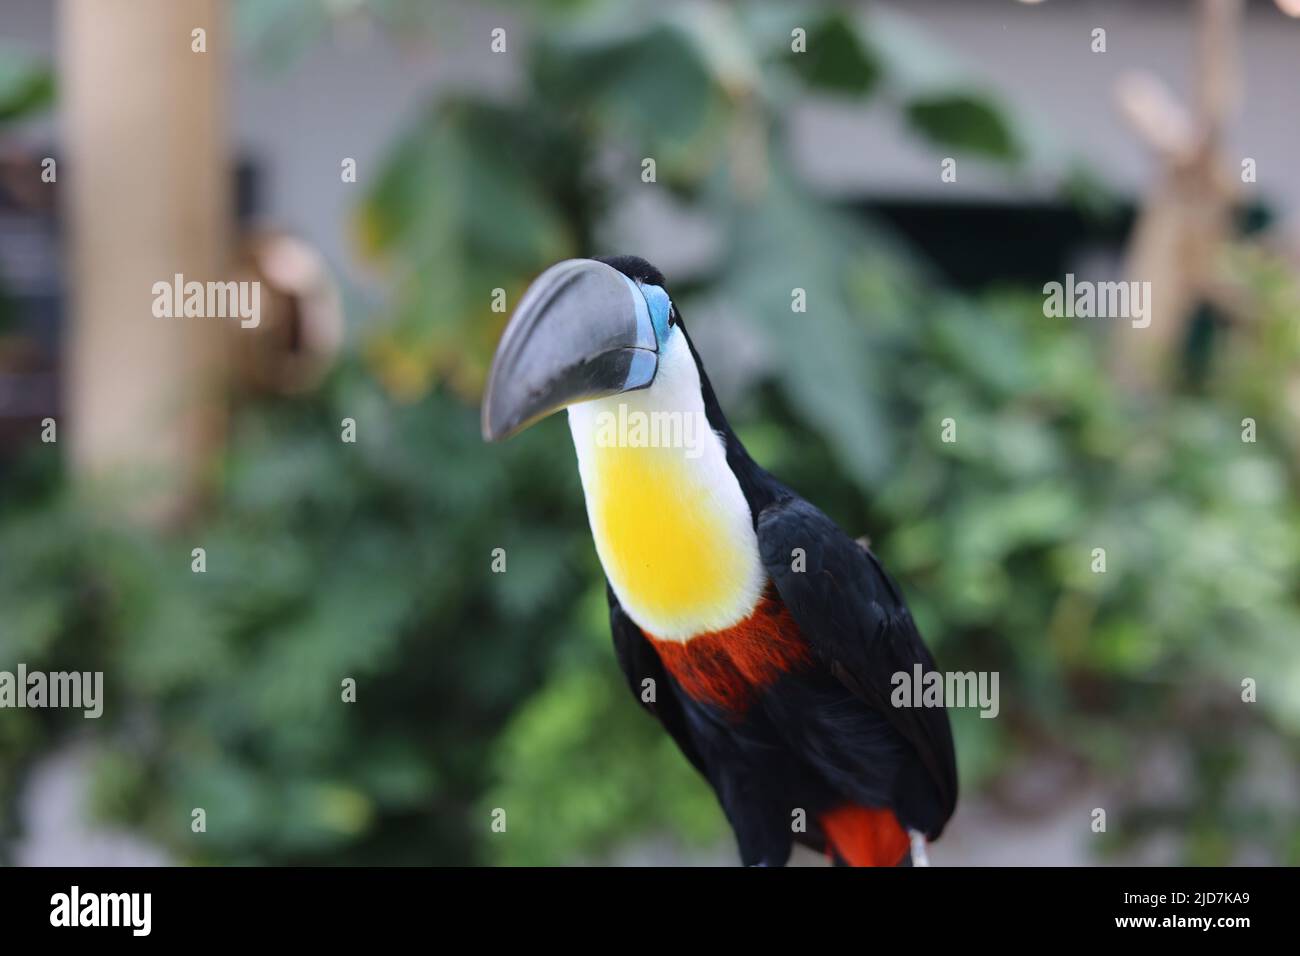 Channel-billed Toucan on a blurred background, high-quality zoom photograph Stock Photo